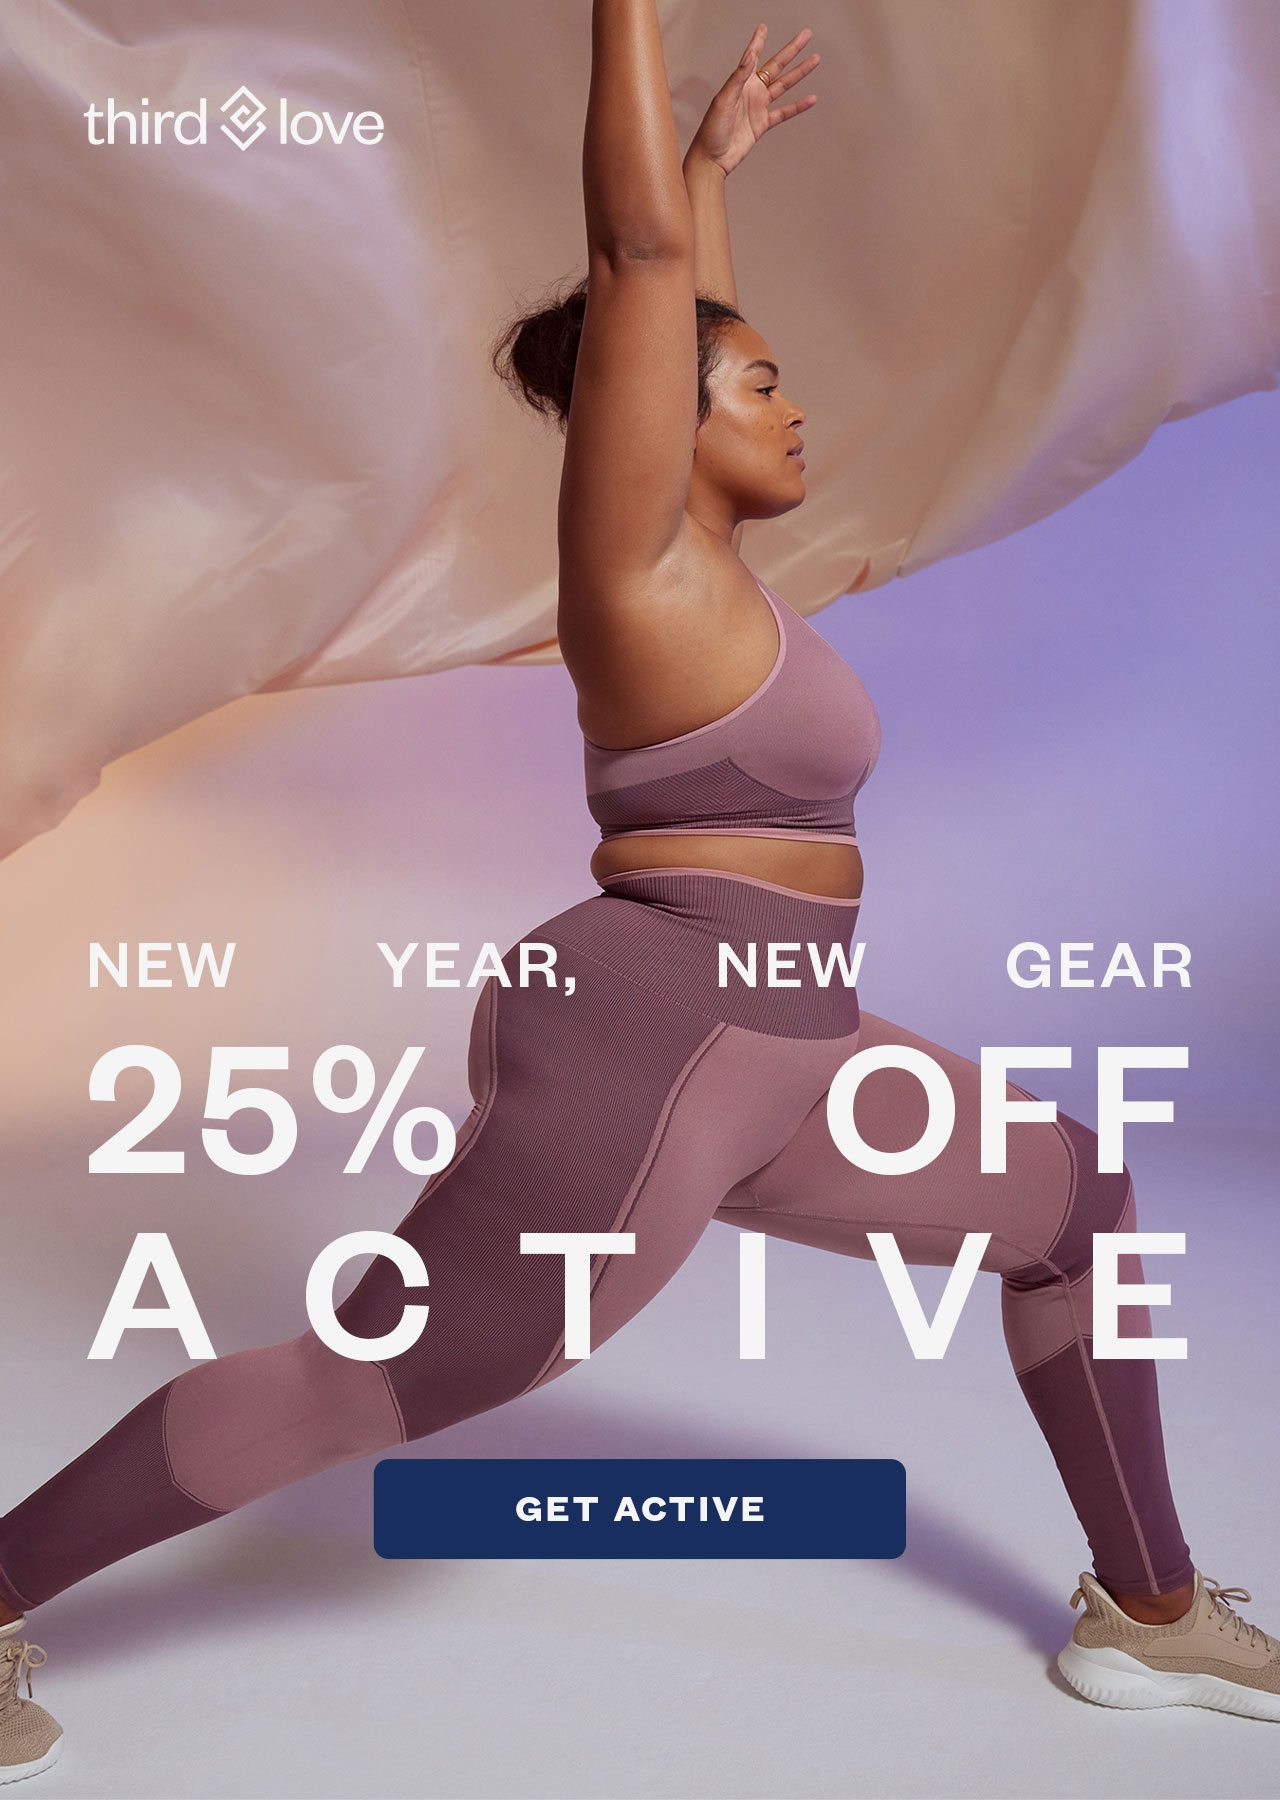 New Year, New Gear 25% OFF ACTIVE